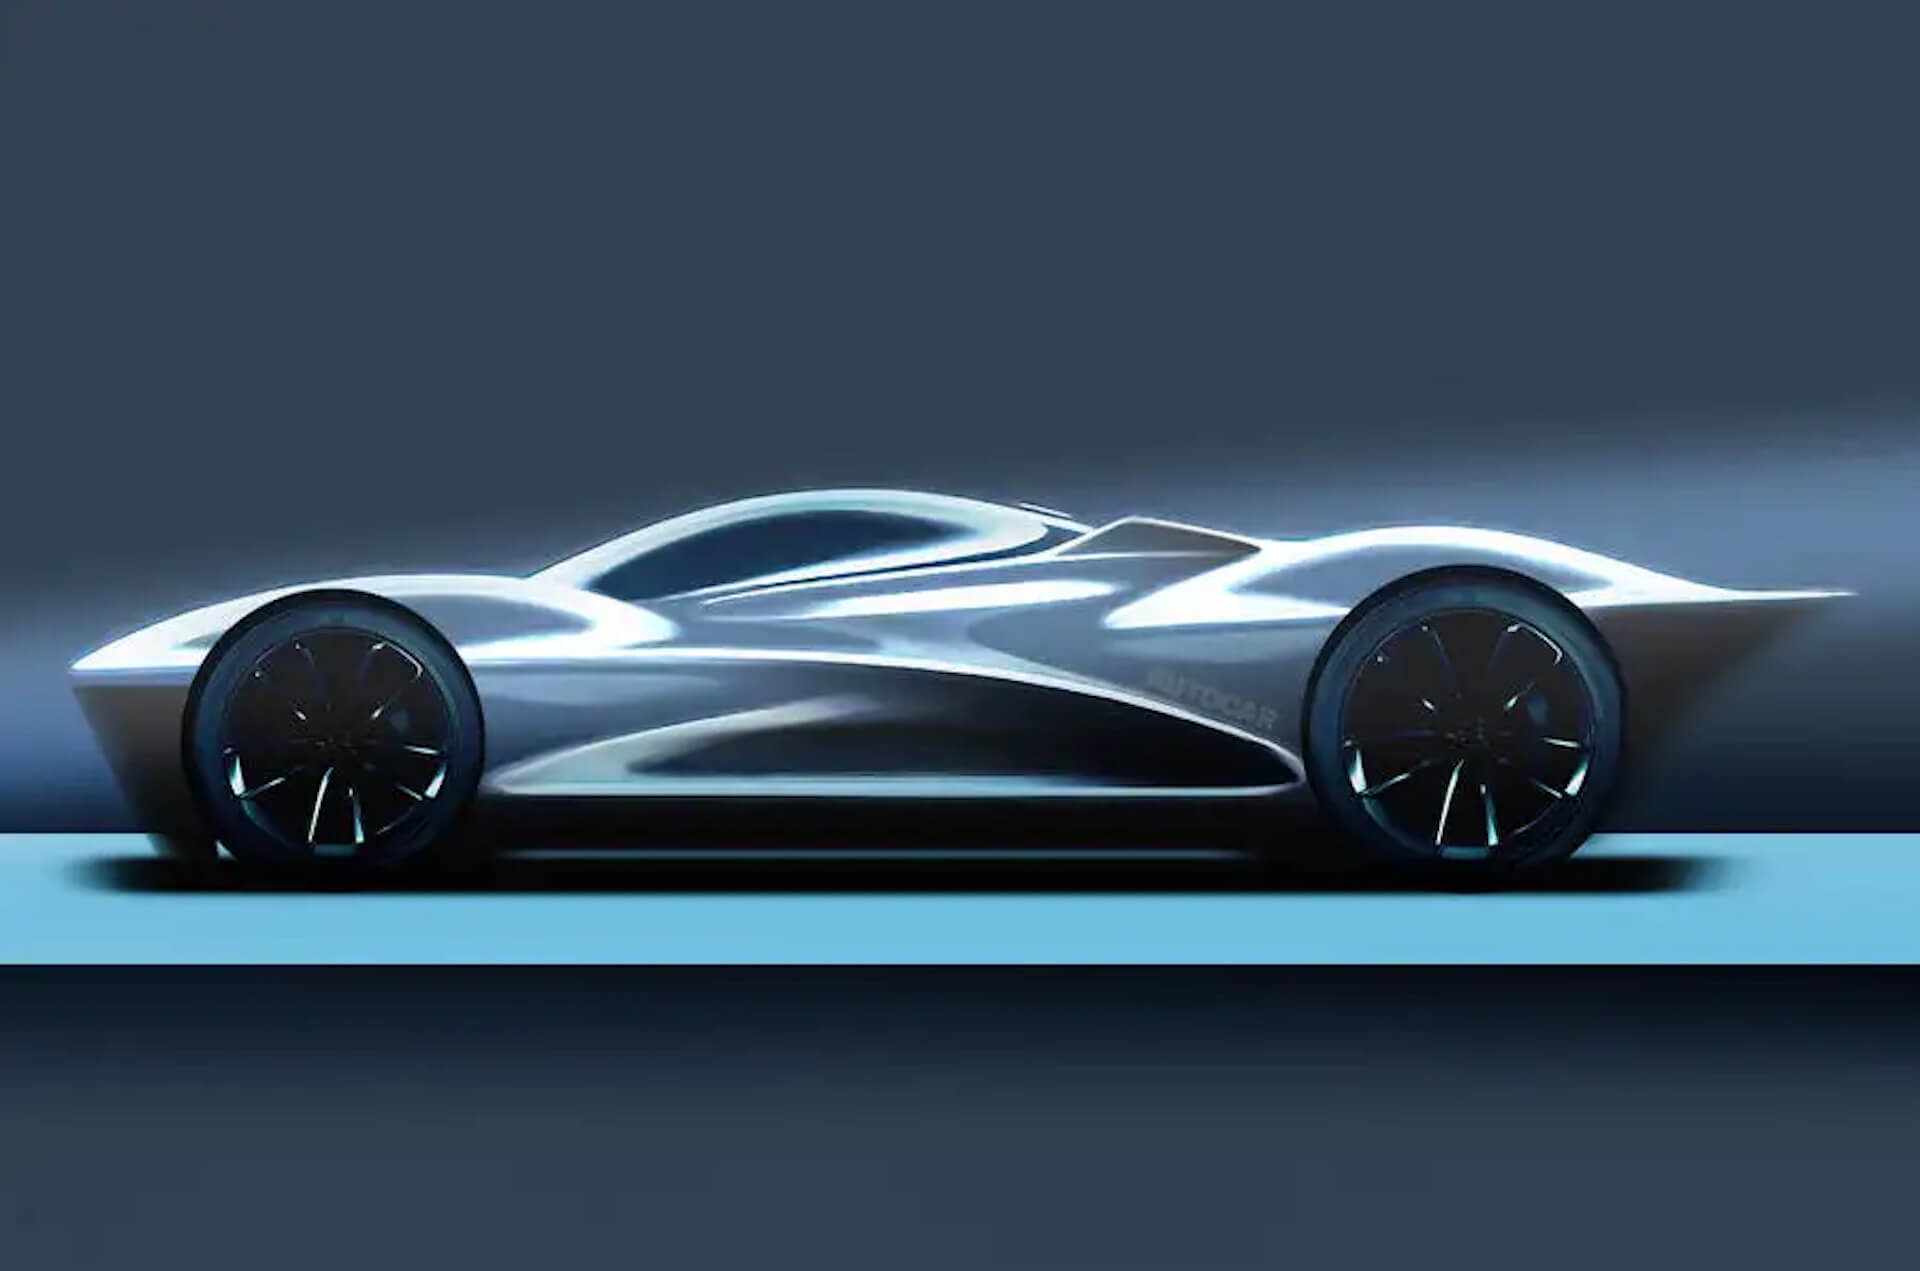 The Red Bull team has announced the date for the premiere of its own hypercar RB17